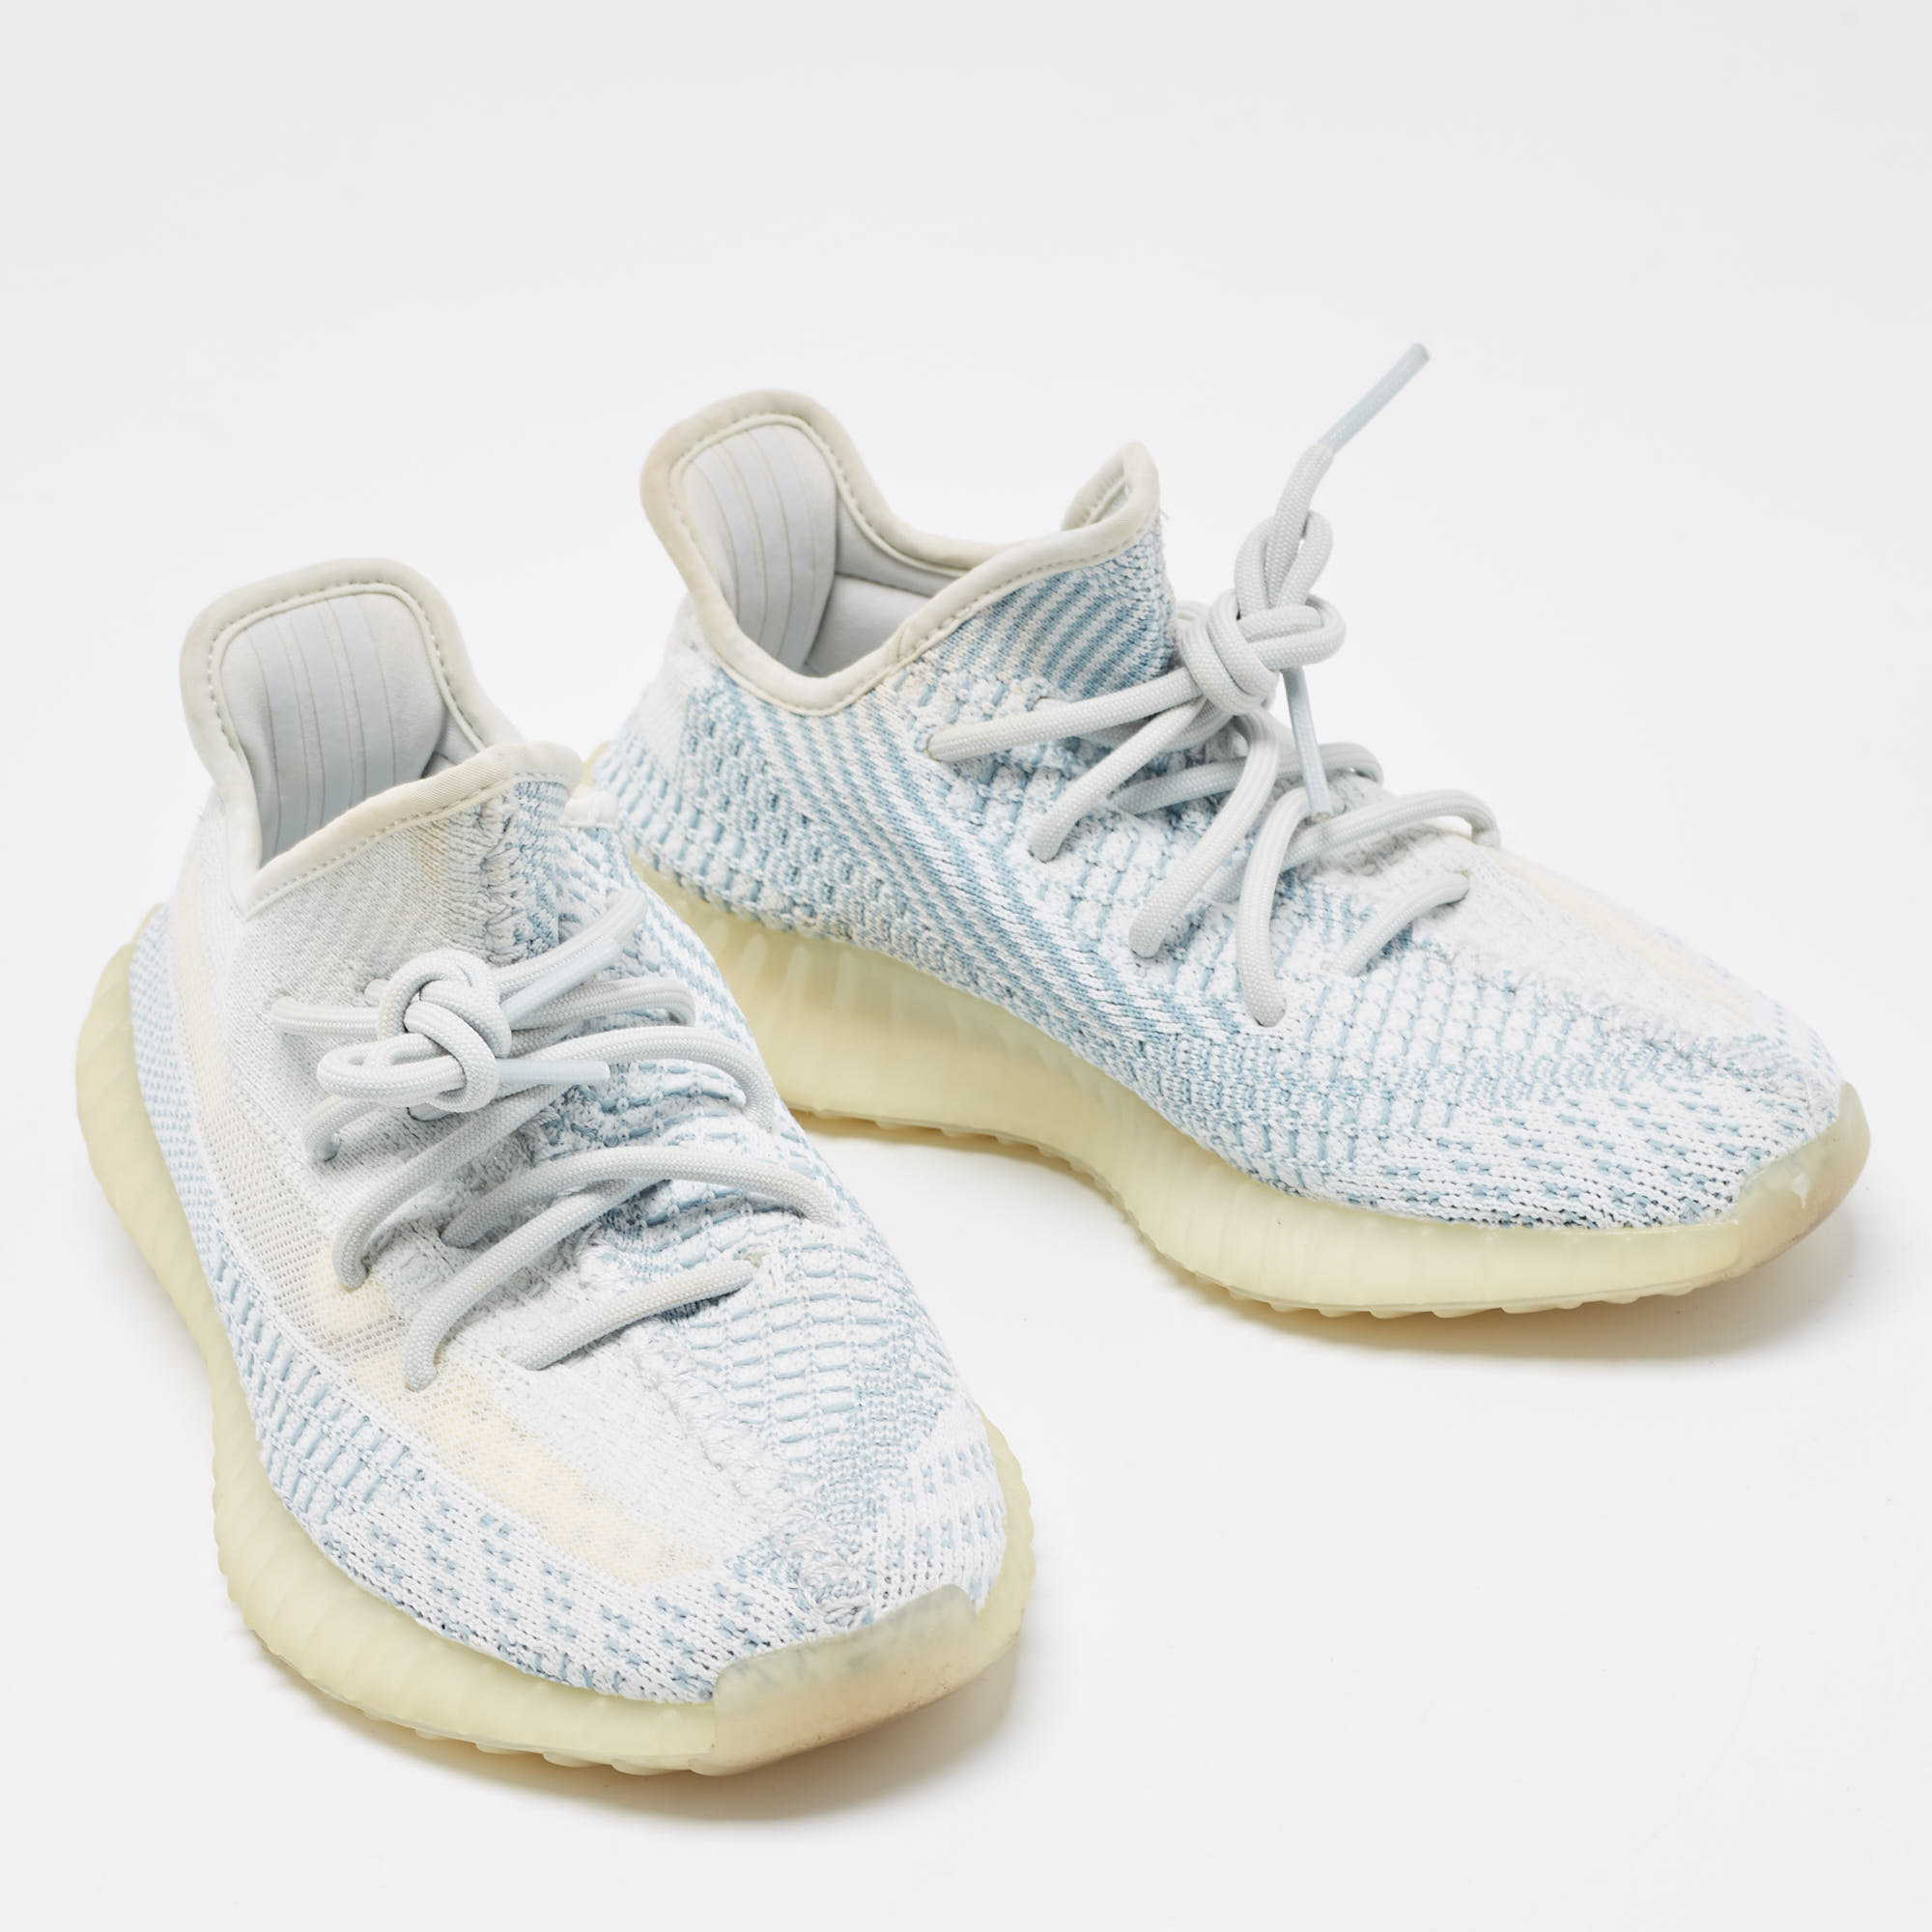 Yeezy X Adidas Blue/White Knit Fabric Boost 350 V2 Cloud White Non-Reflective Sneakers Size 37 1/3